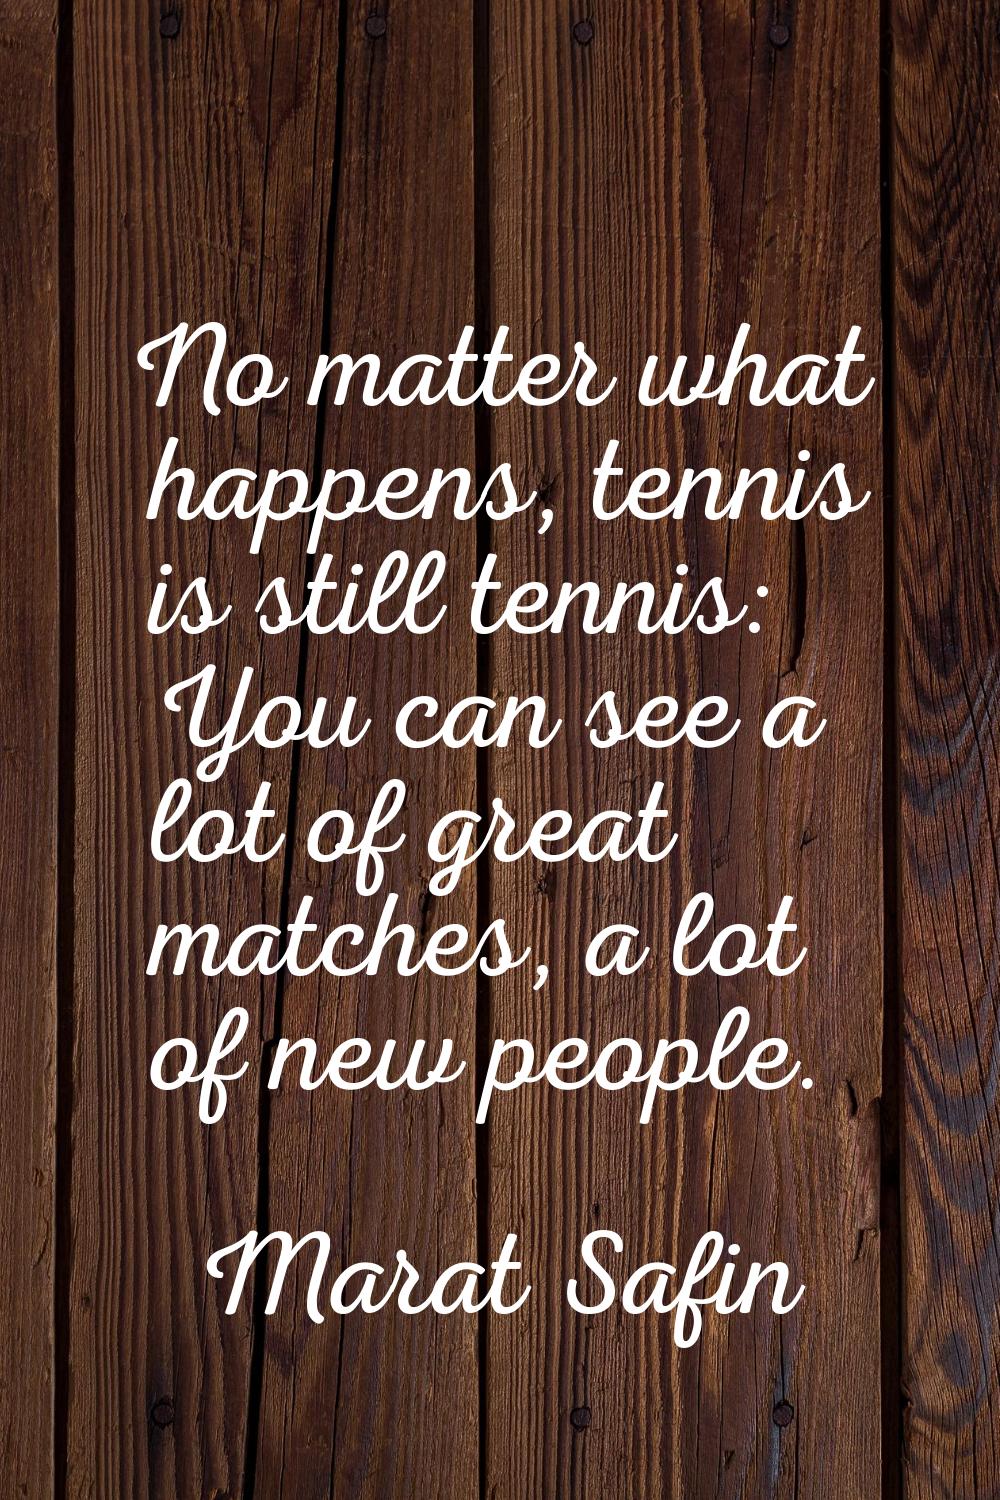 No matter what happens, tennis is still tennis: You can see a lot of great matches, a lot of new pe